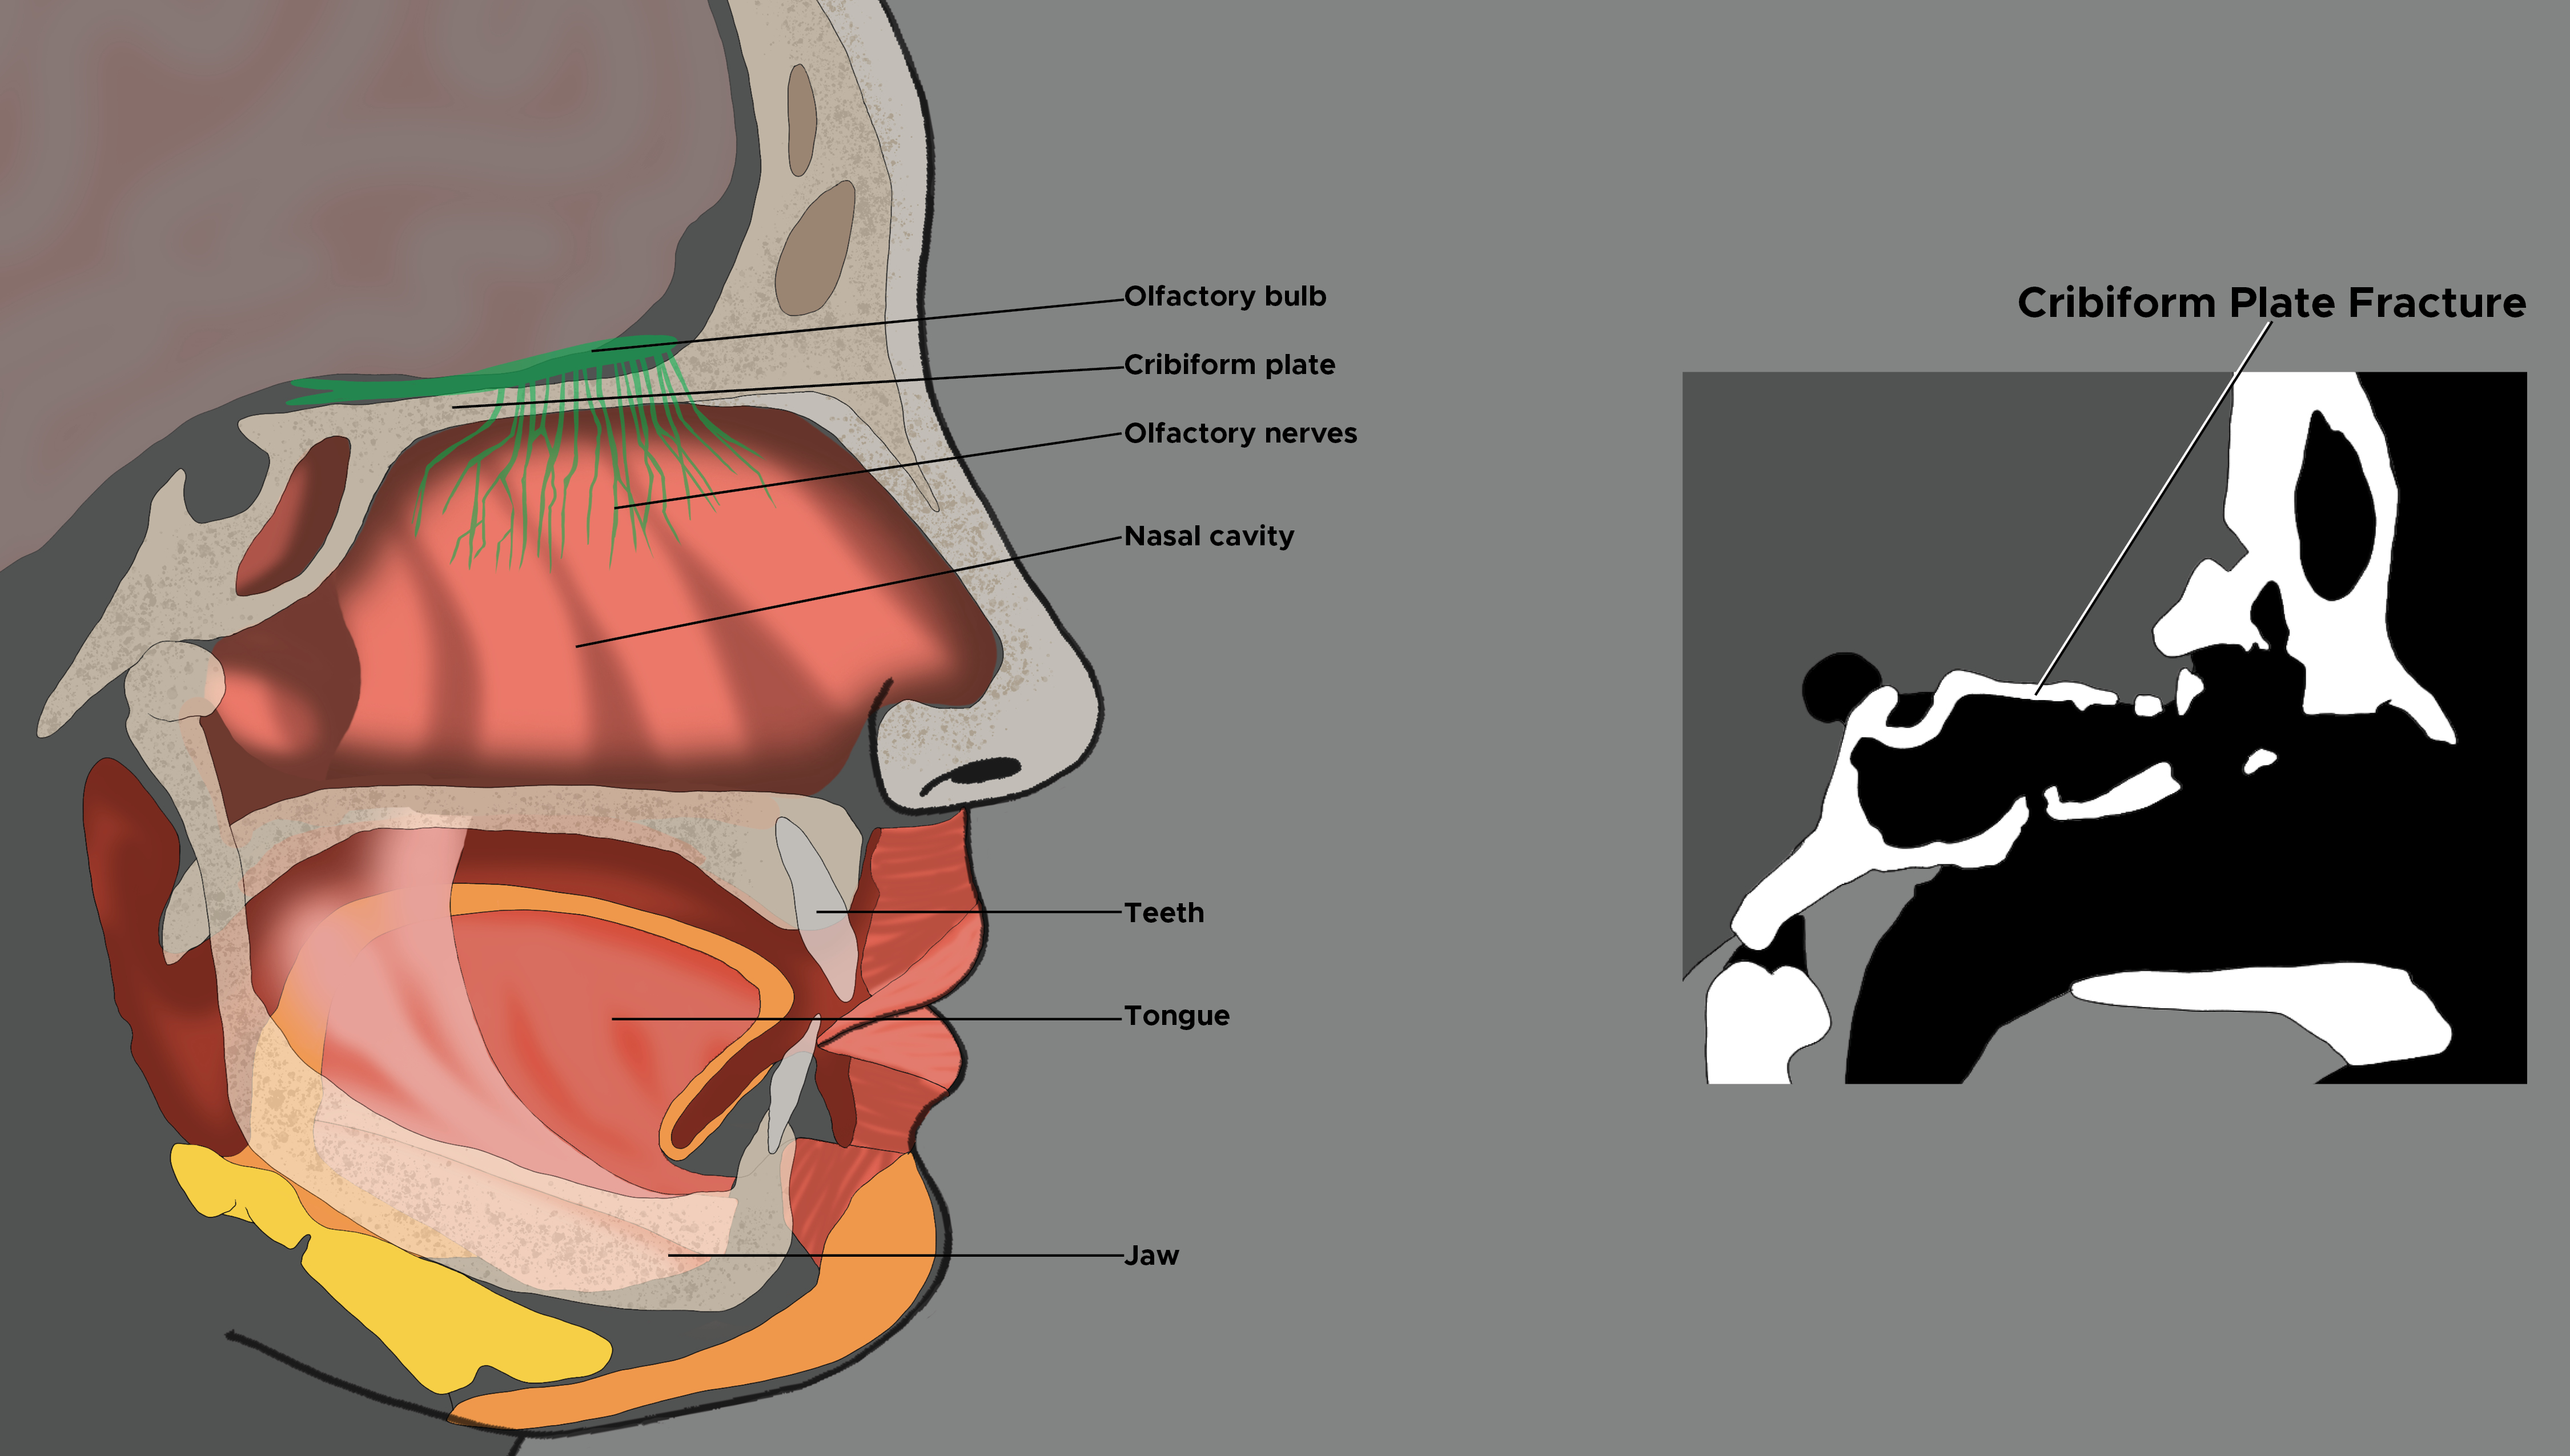 Illustration of head and sinus, olfactory bulb and nerves, cribiform plate fracture